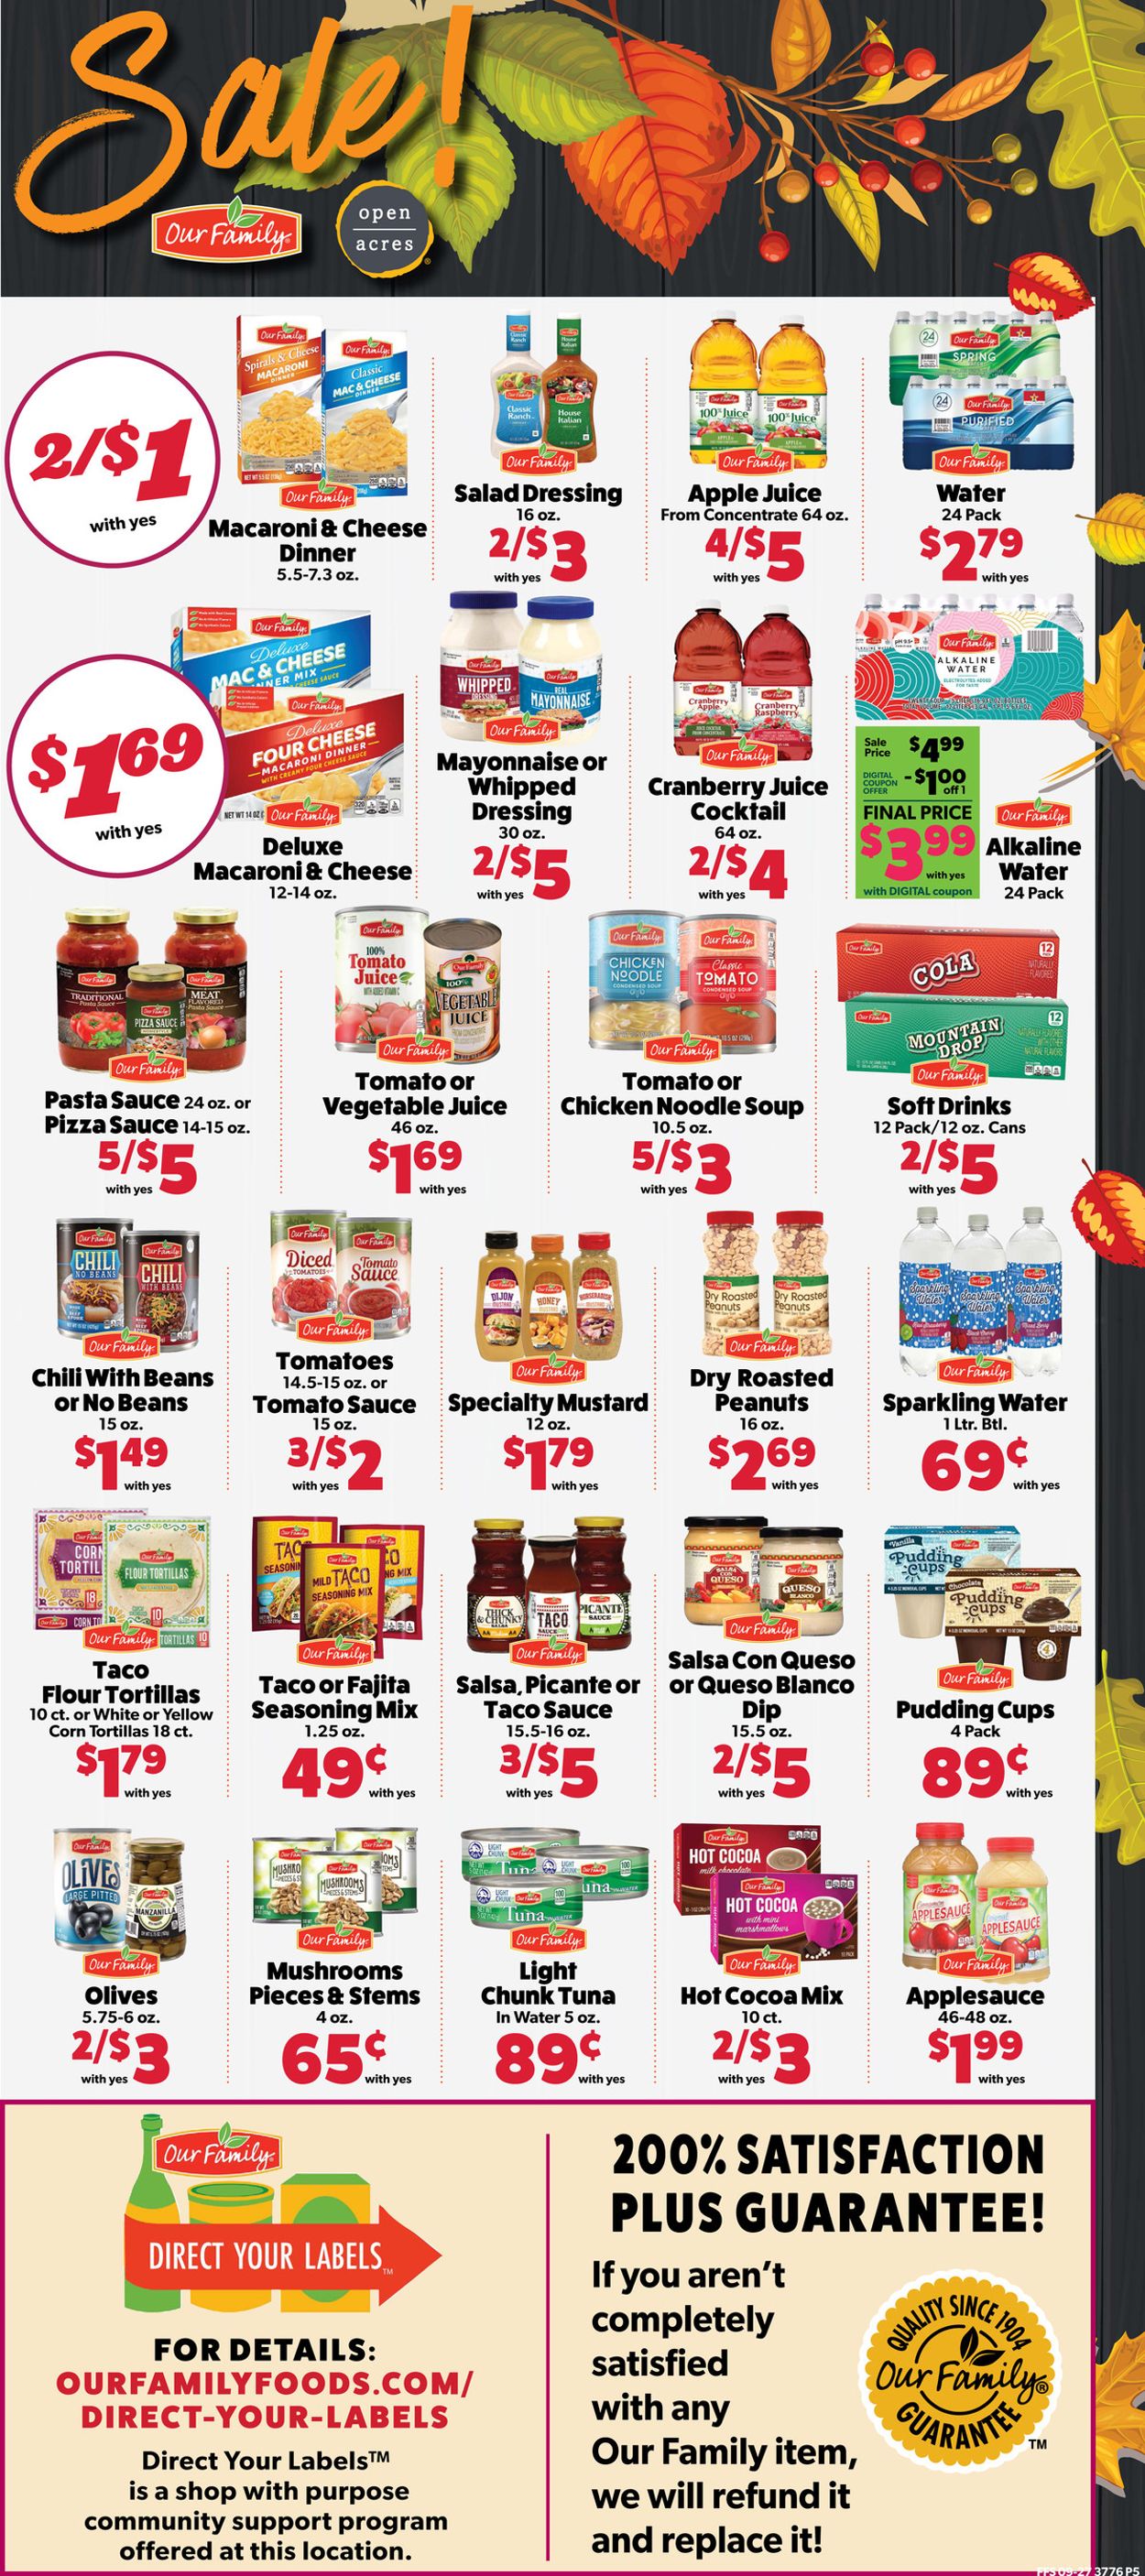 Family Fare Ad from 09/30/2020